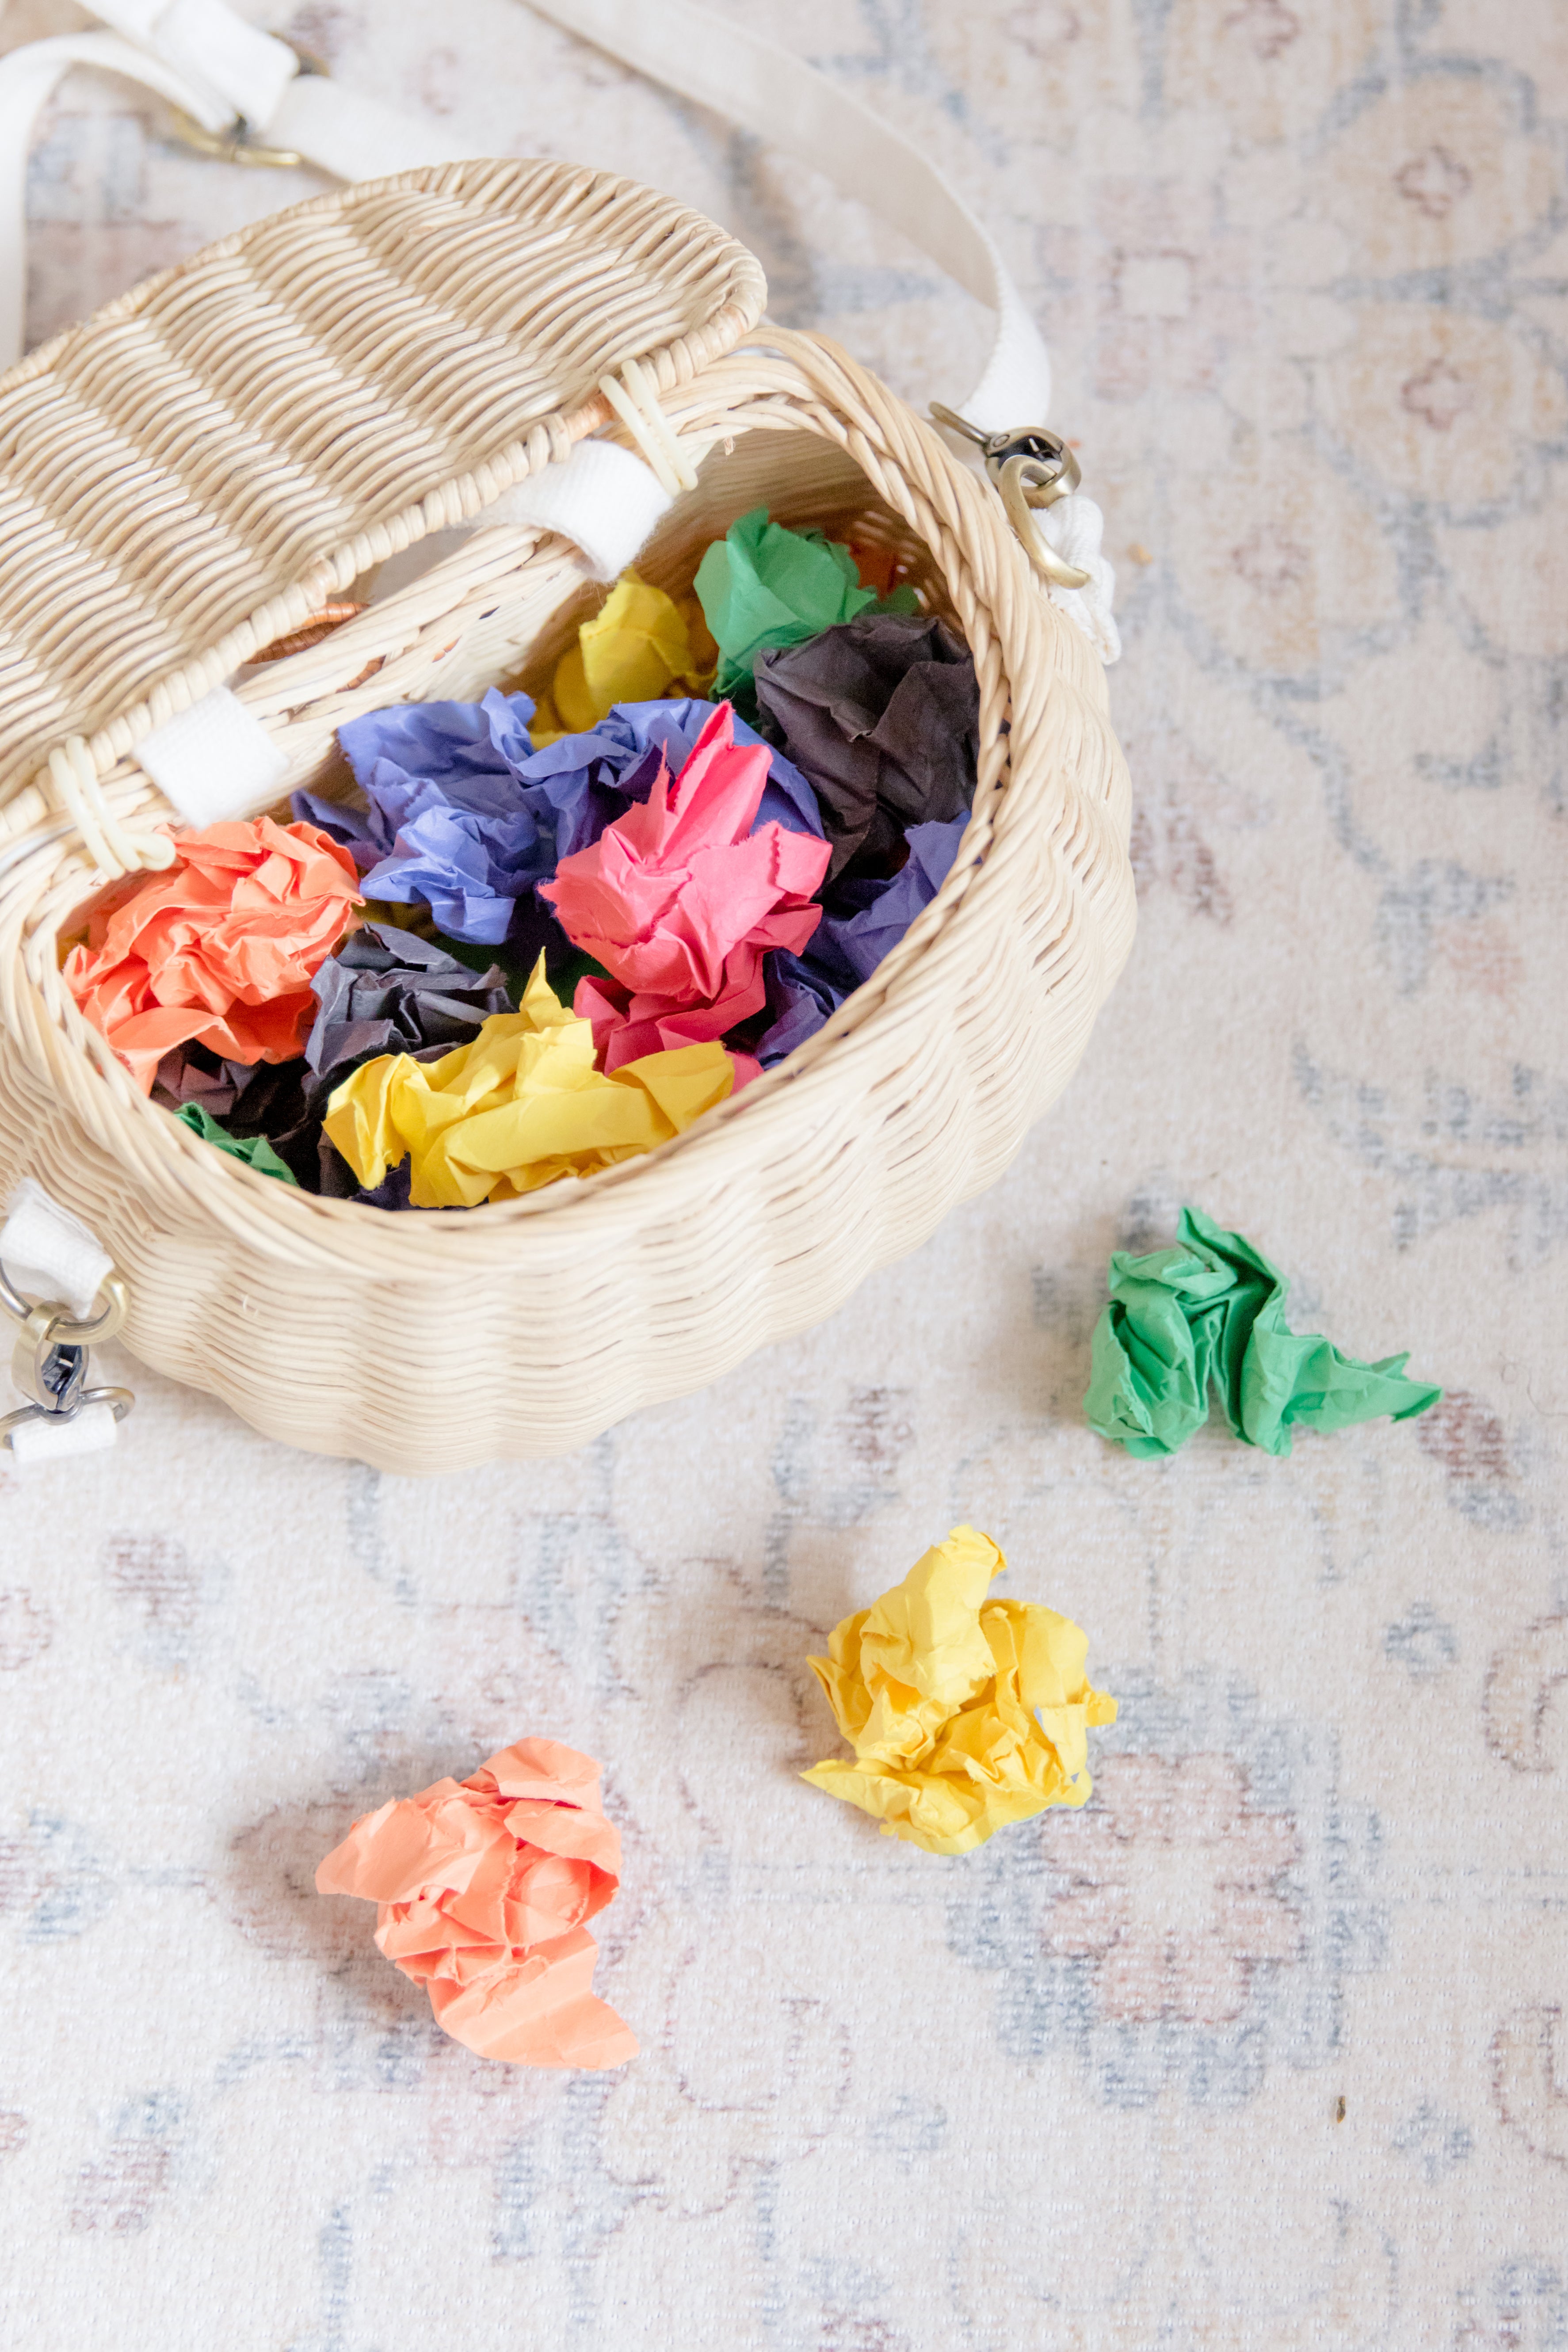 A wicker basket filled with crumpled pieces of multi-colored paper